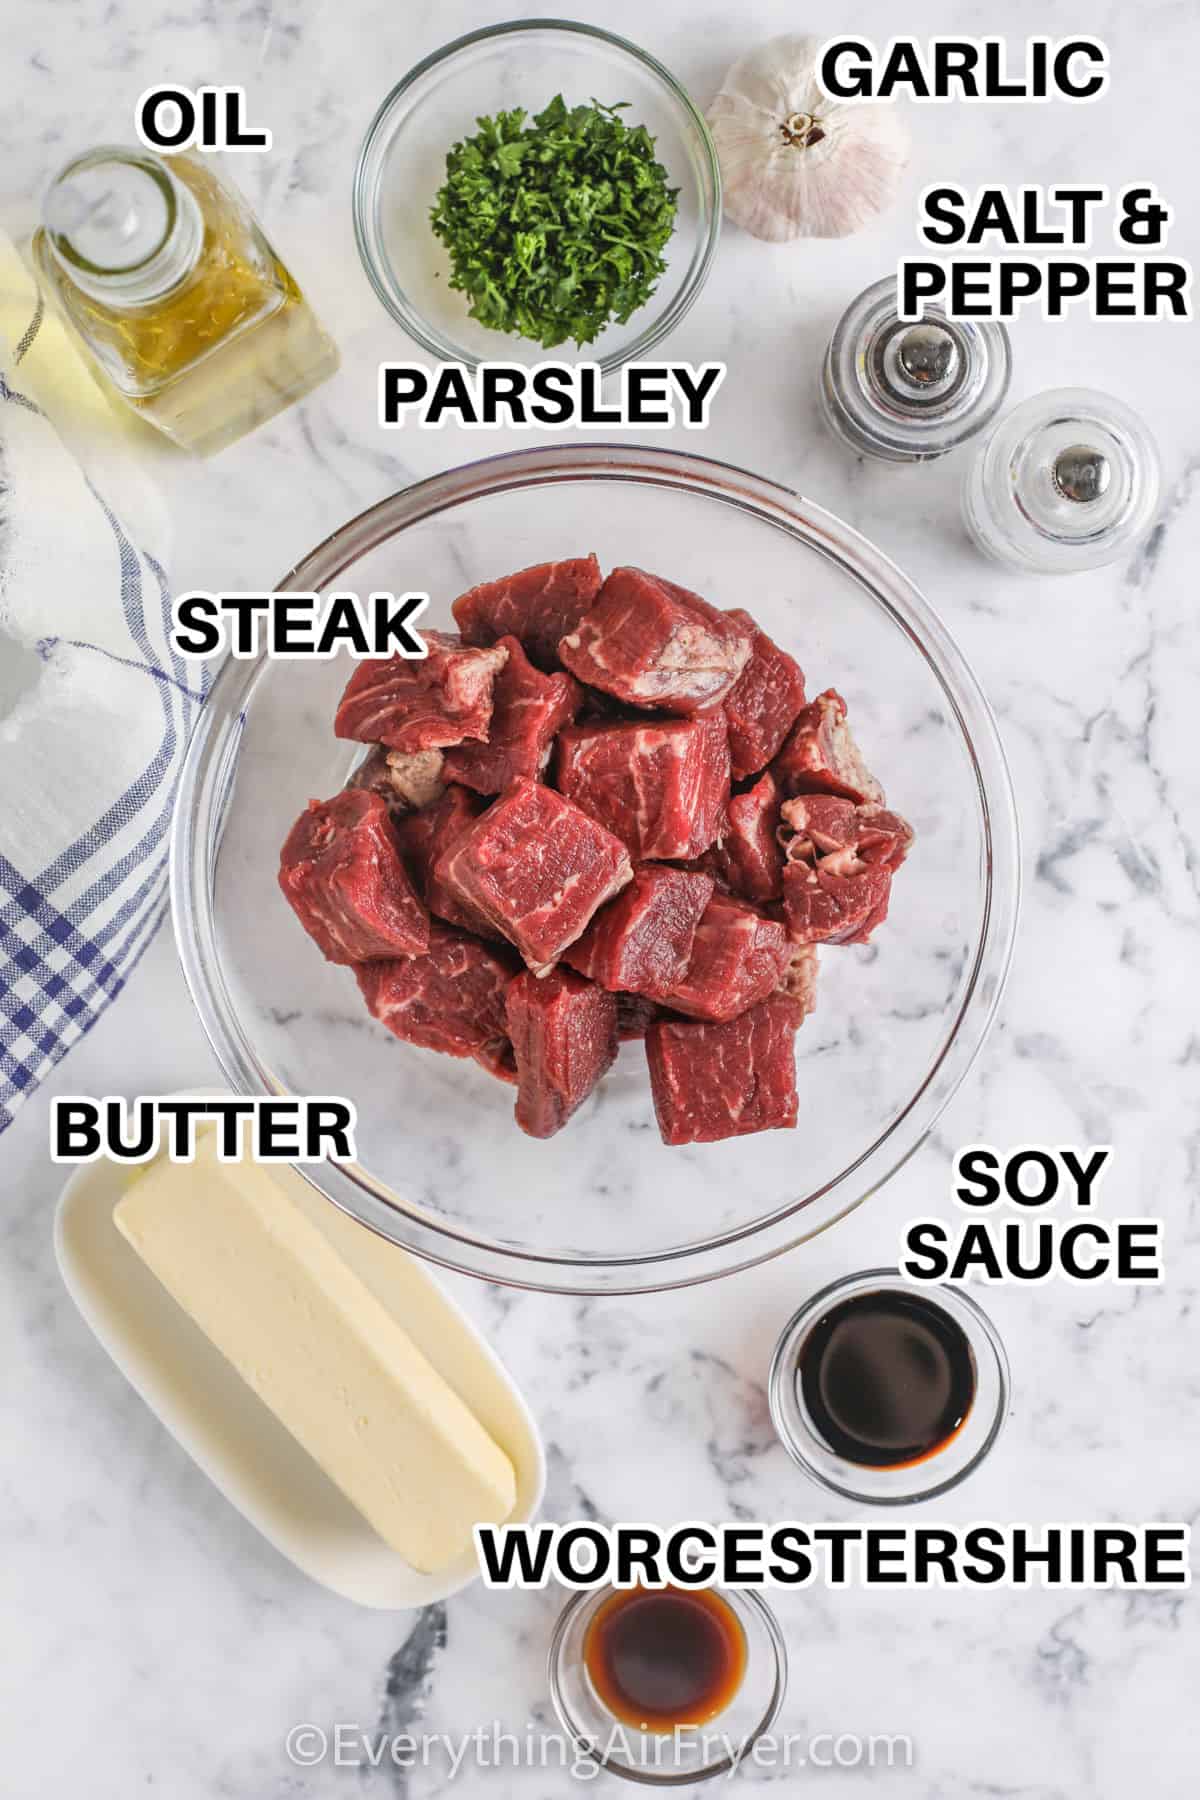 steak, butter, garlic, soy sauce and Worcestershire with other ingredients to make Air Fryer Steak Bites with lablels